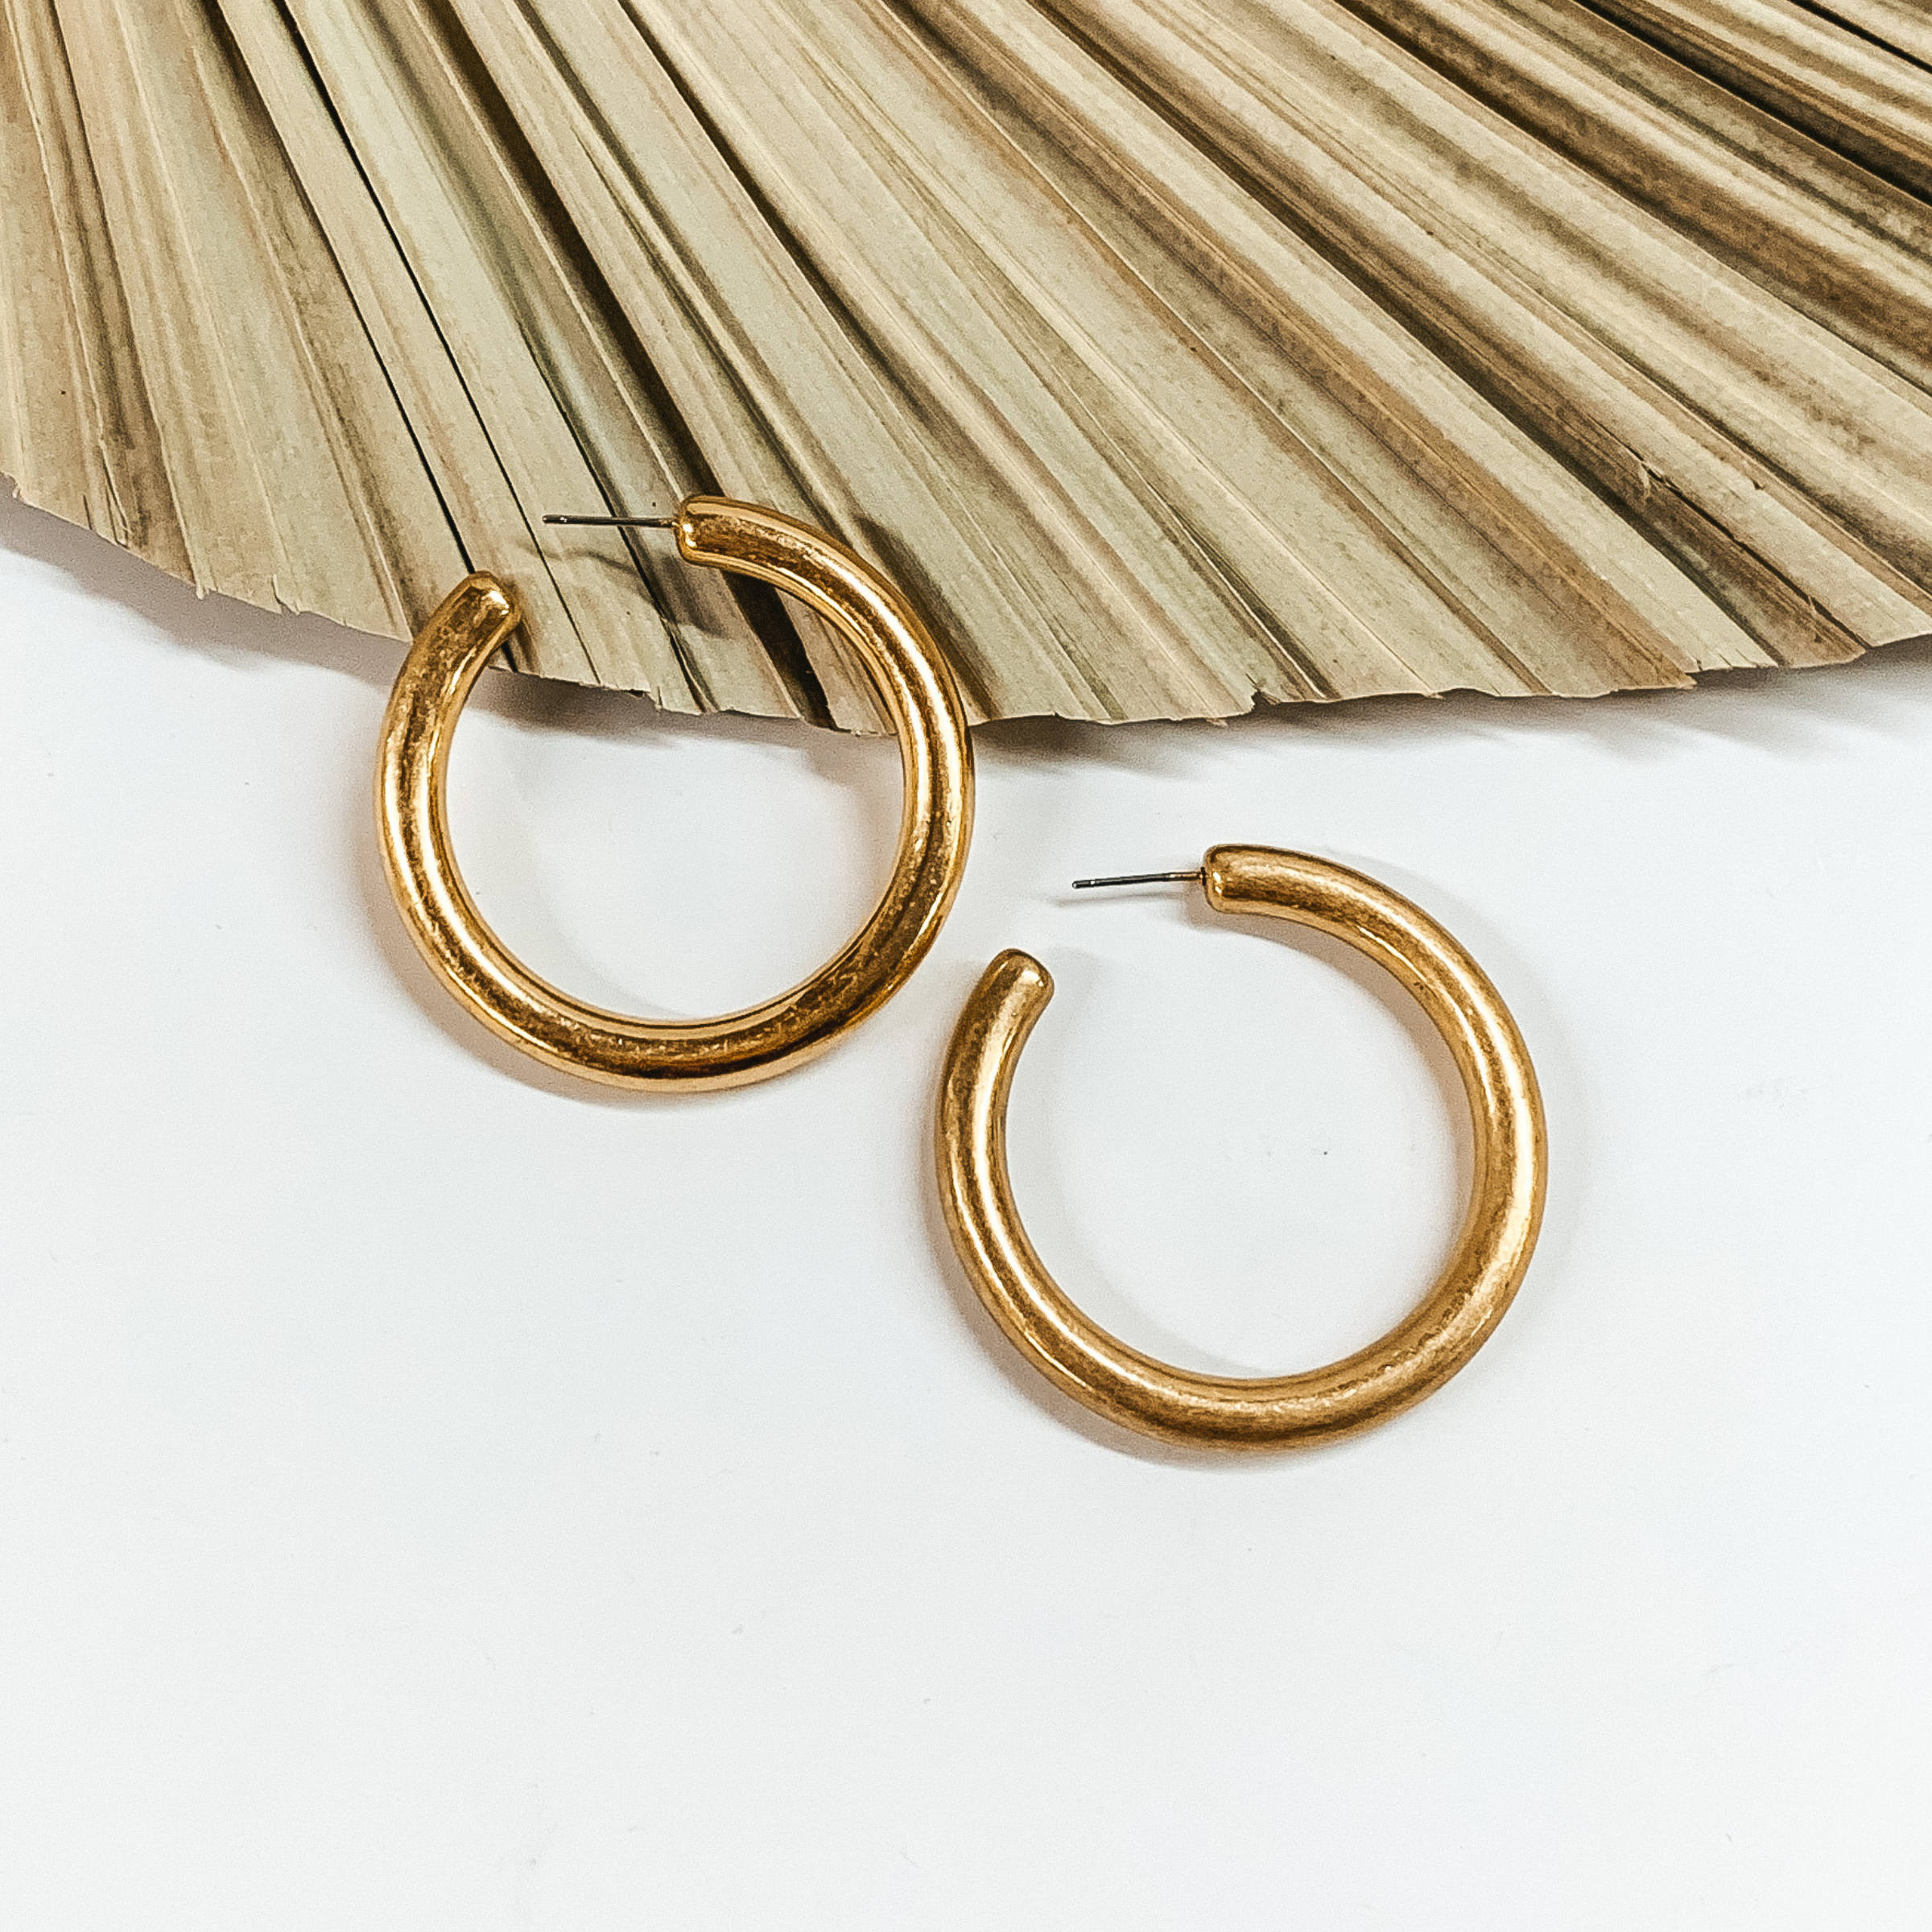 Clean Slate Large Hoop Earrings in Worn Gold Tone - Giddy Up Glamour Boutique